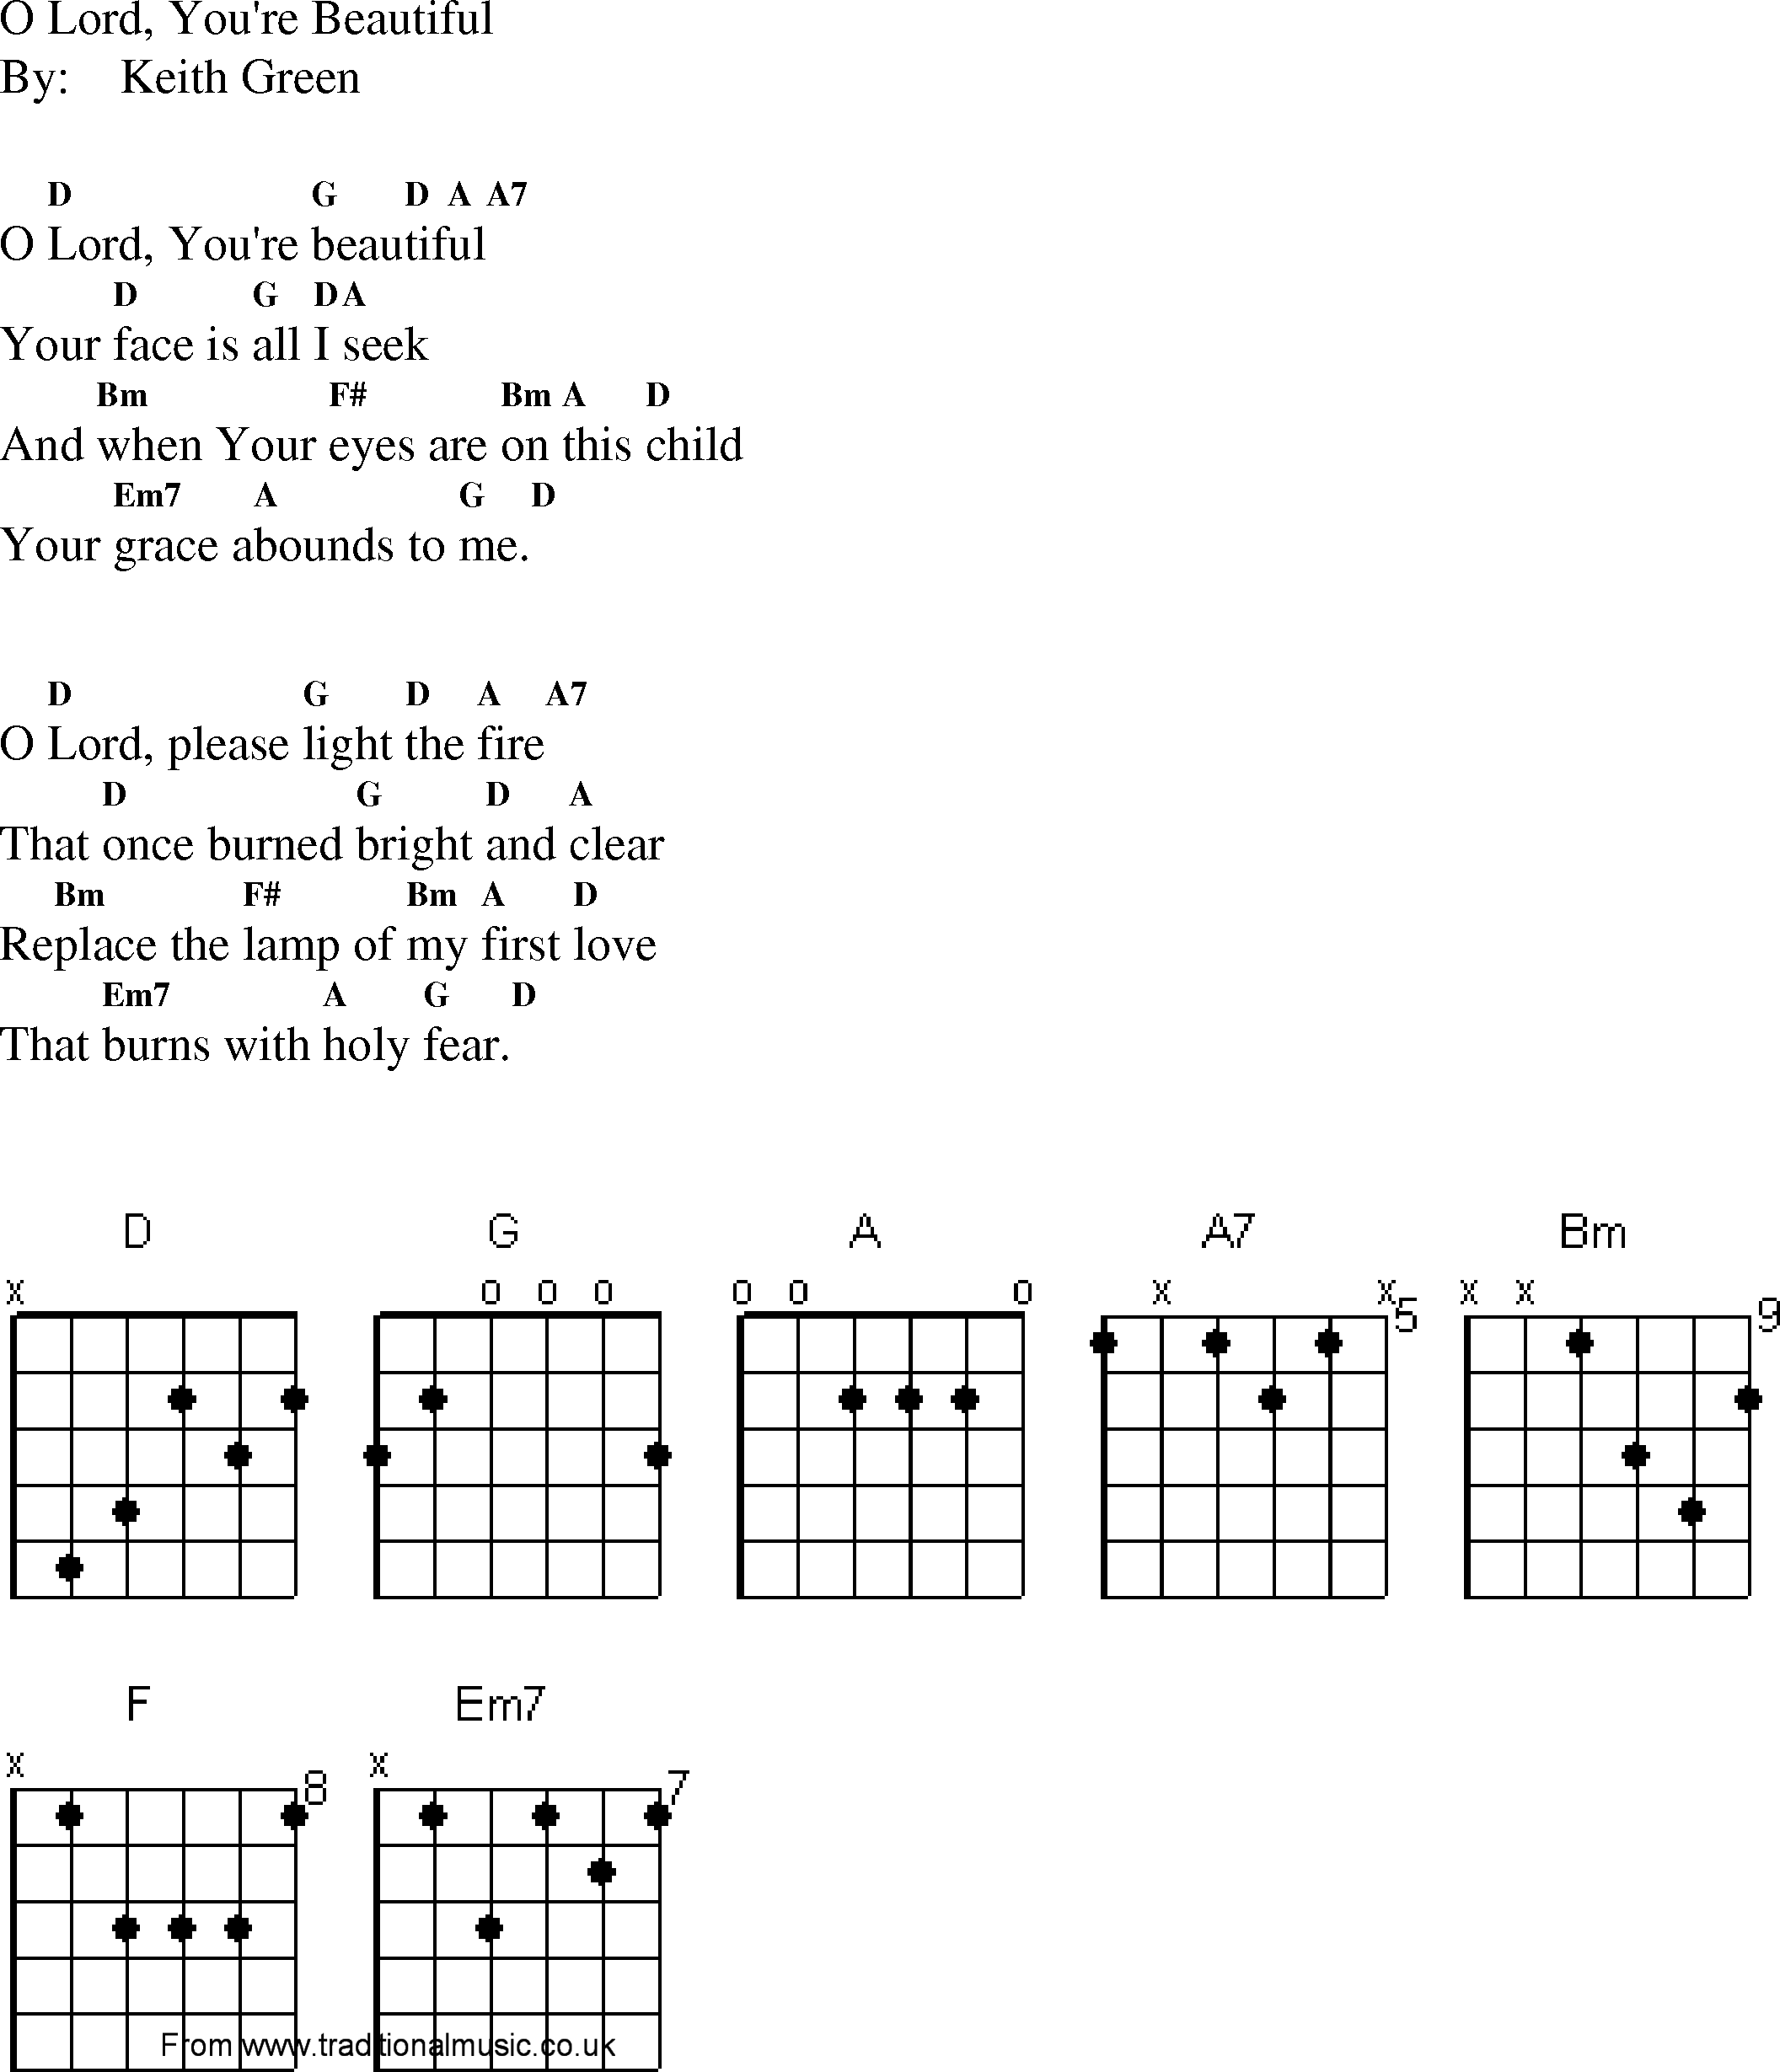 Gospel Song: o_lord_youre_beautiful, lyrics and chords.